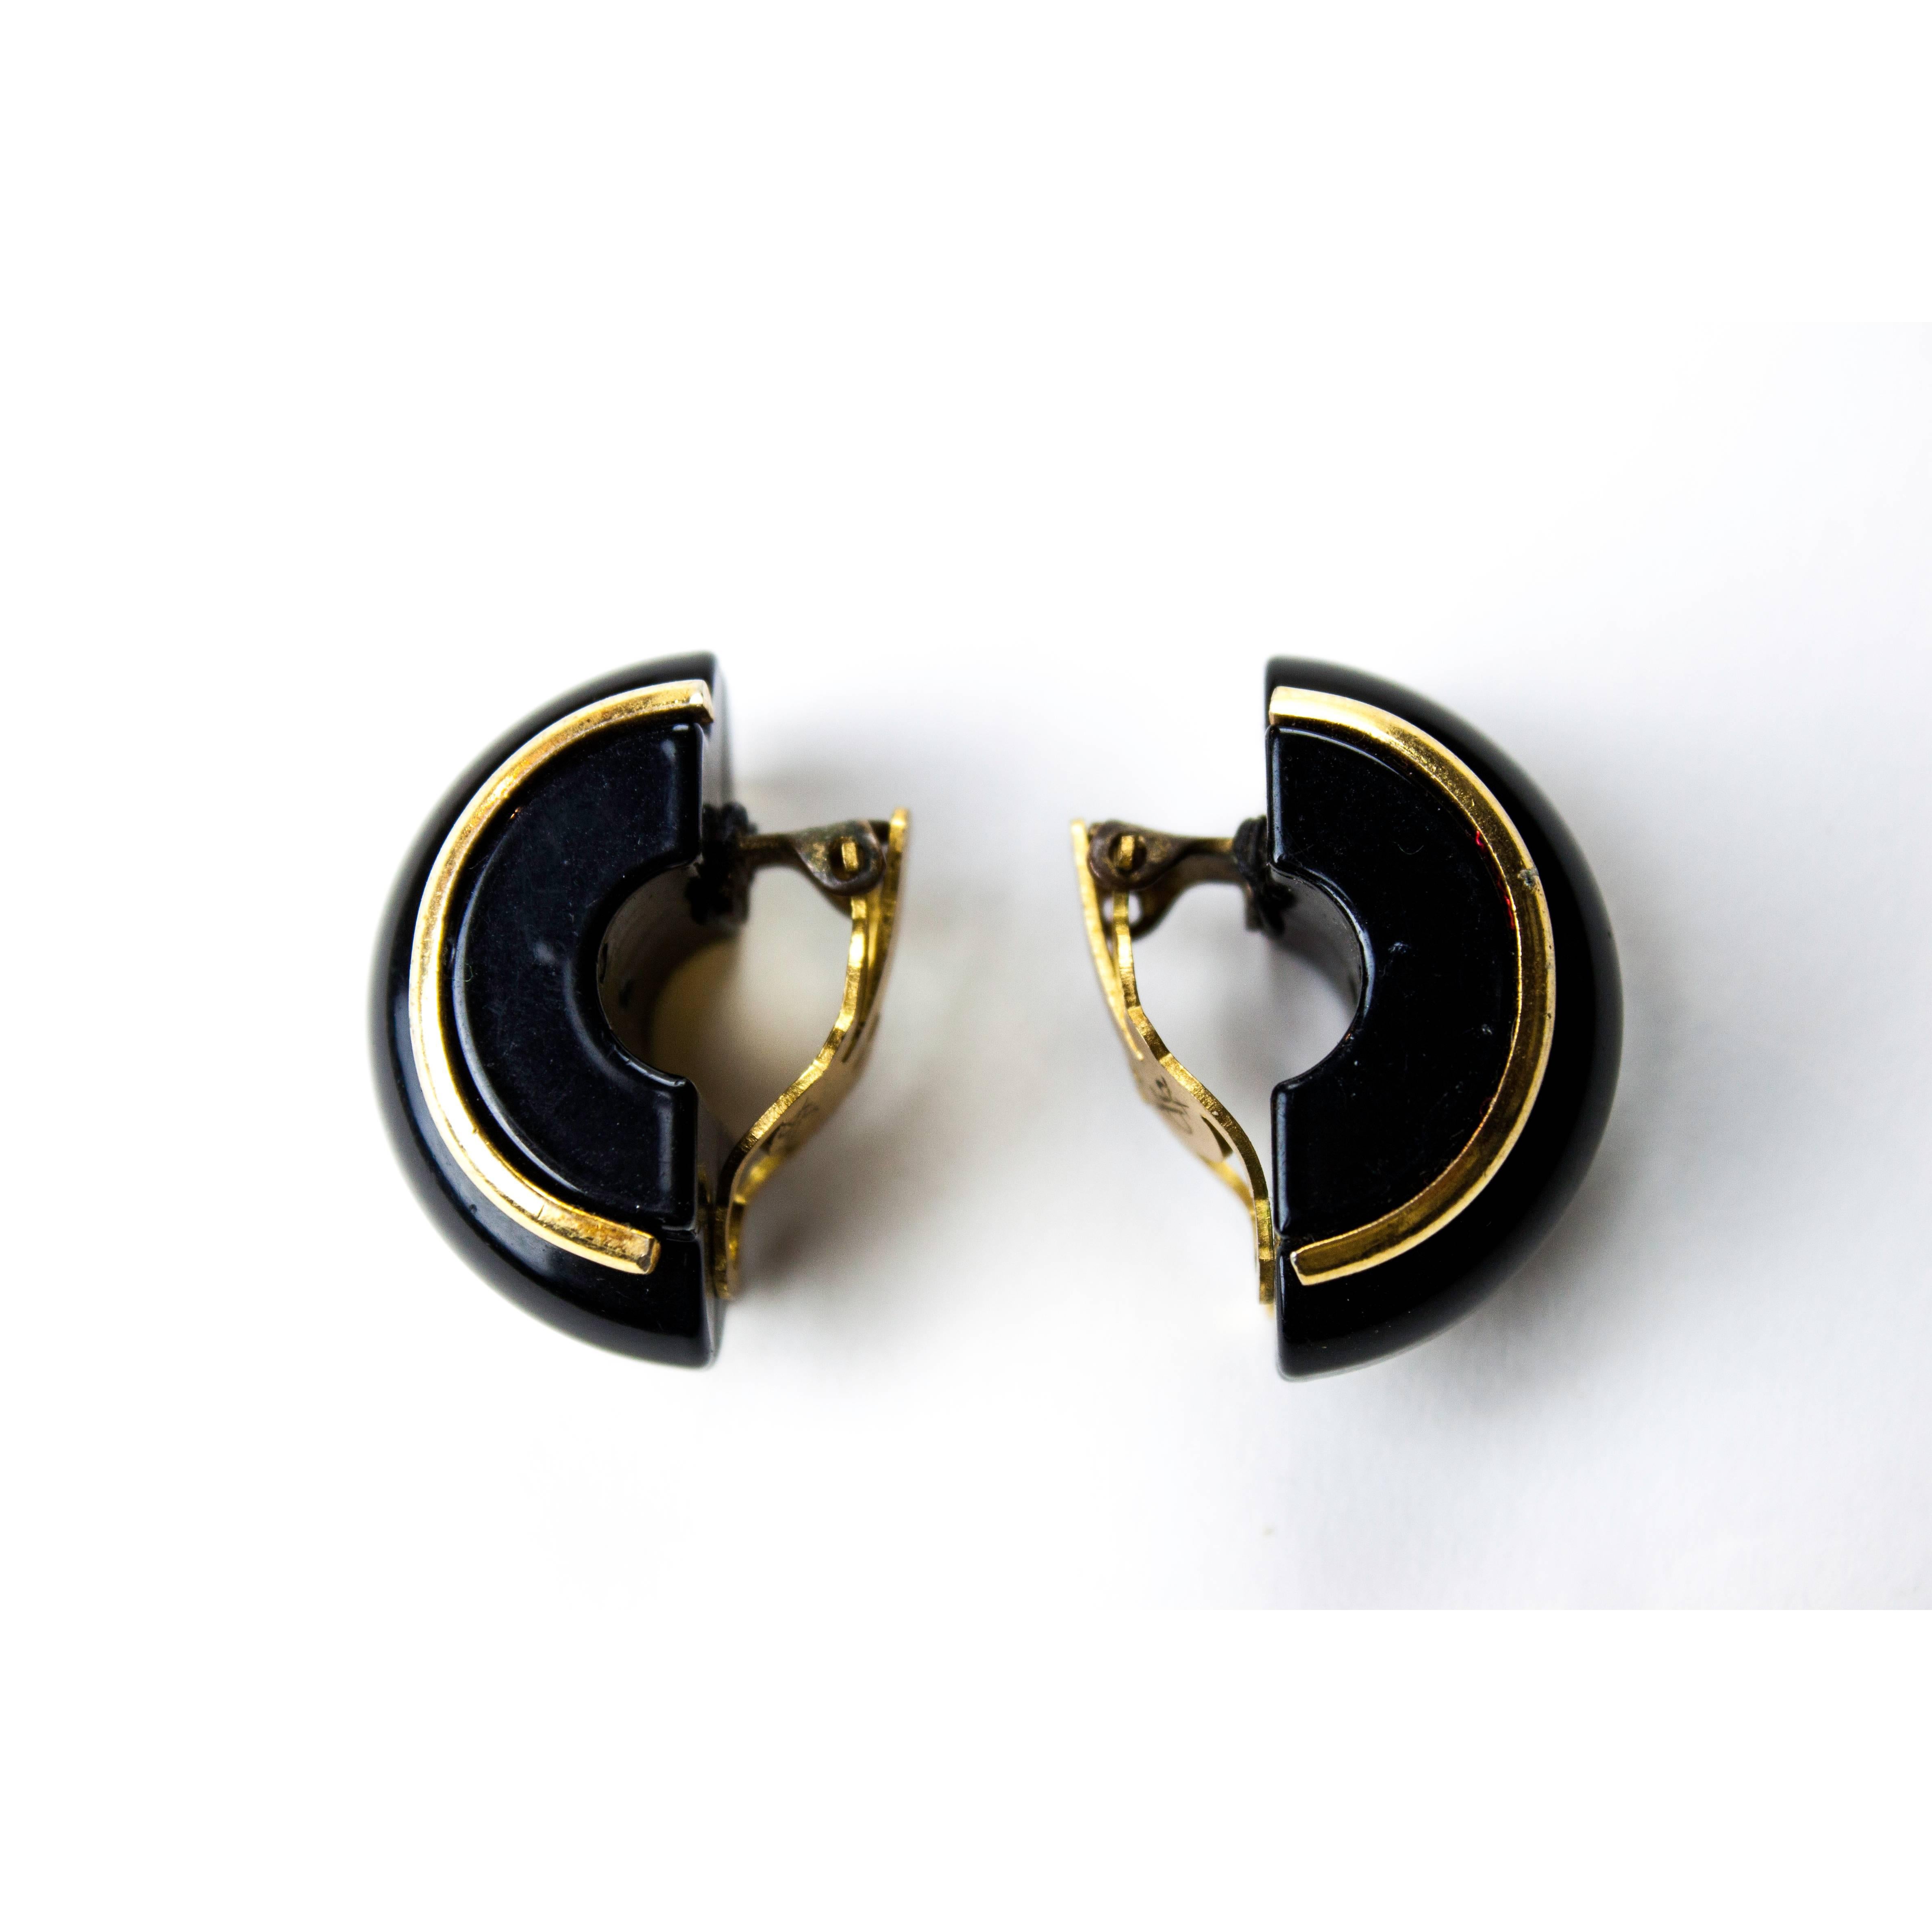 These half creole Yves Saint Laurent clip-on earrings are constructed from black  lucite mimicking lacquer material. These delicate crescents are adorned with gold lucite piping that emphasis the modern and exotic shape.
Signed on the metal plates